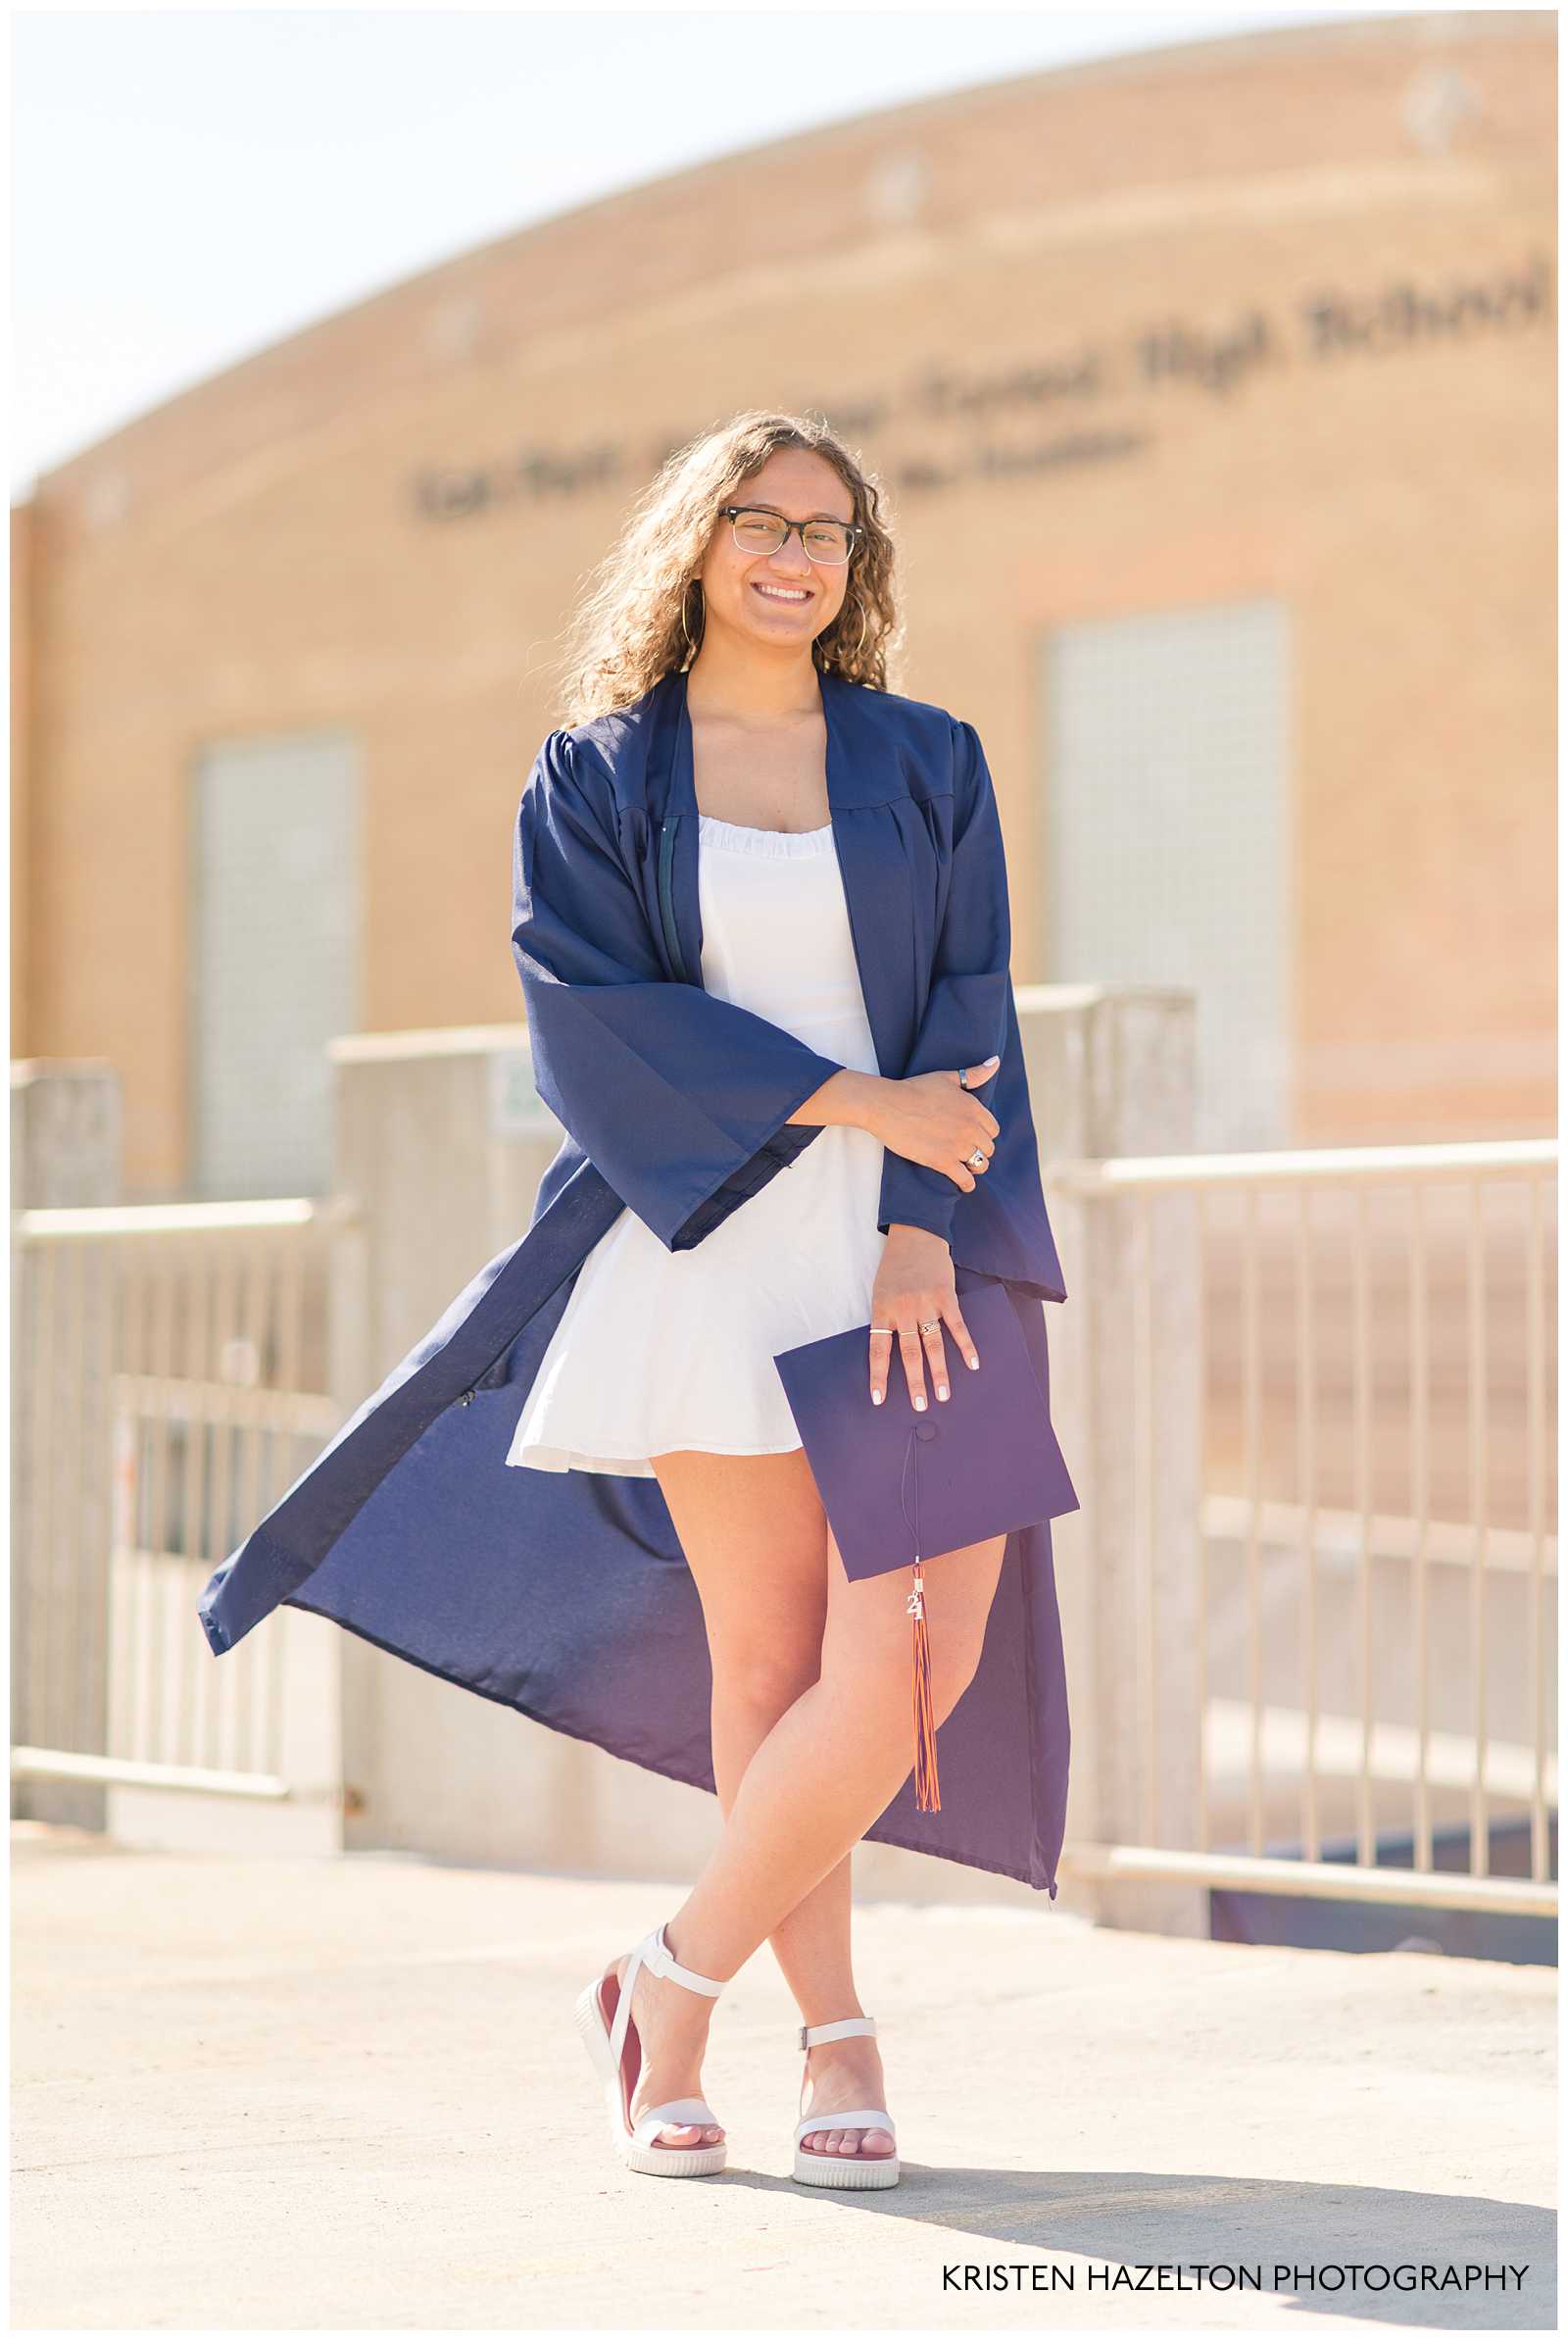 OPRFHS Senior Photos of a female graduate wearing her gown and holding her cap